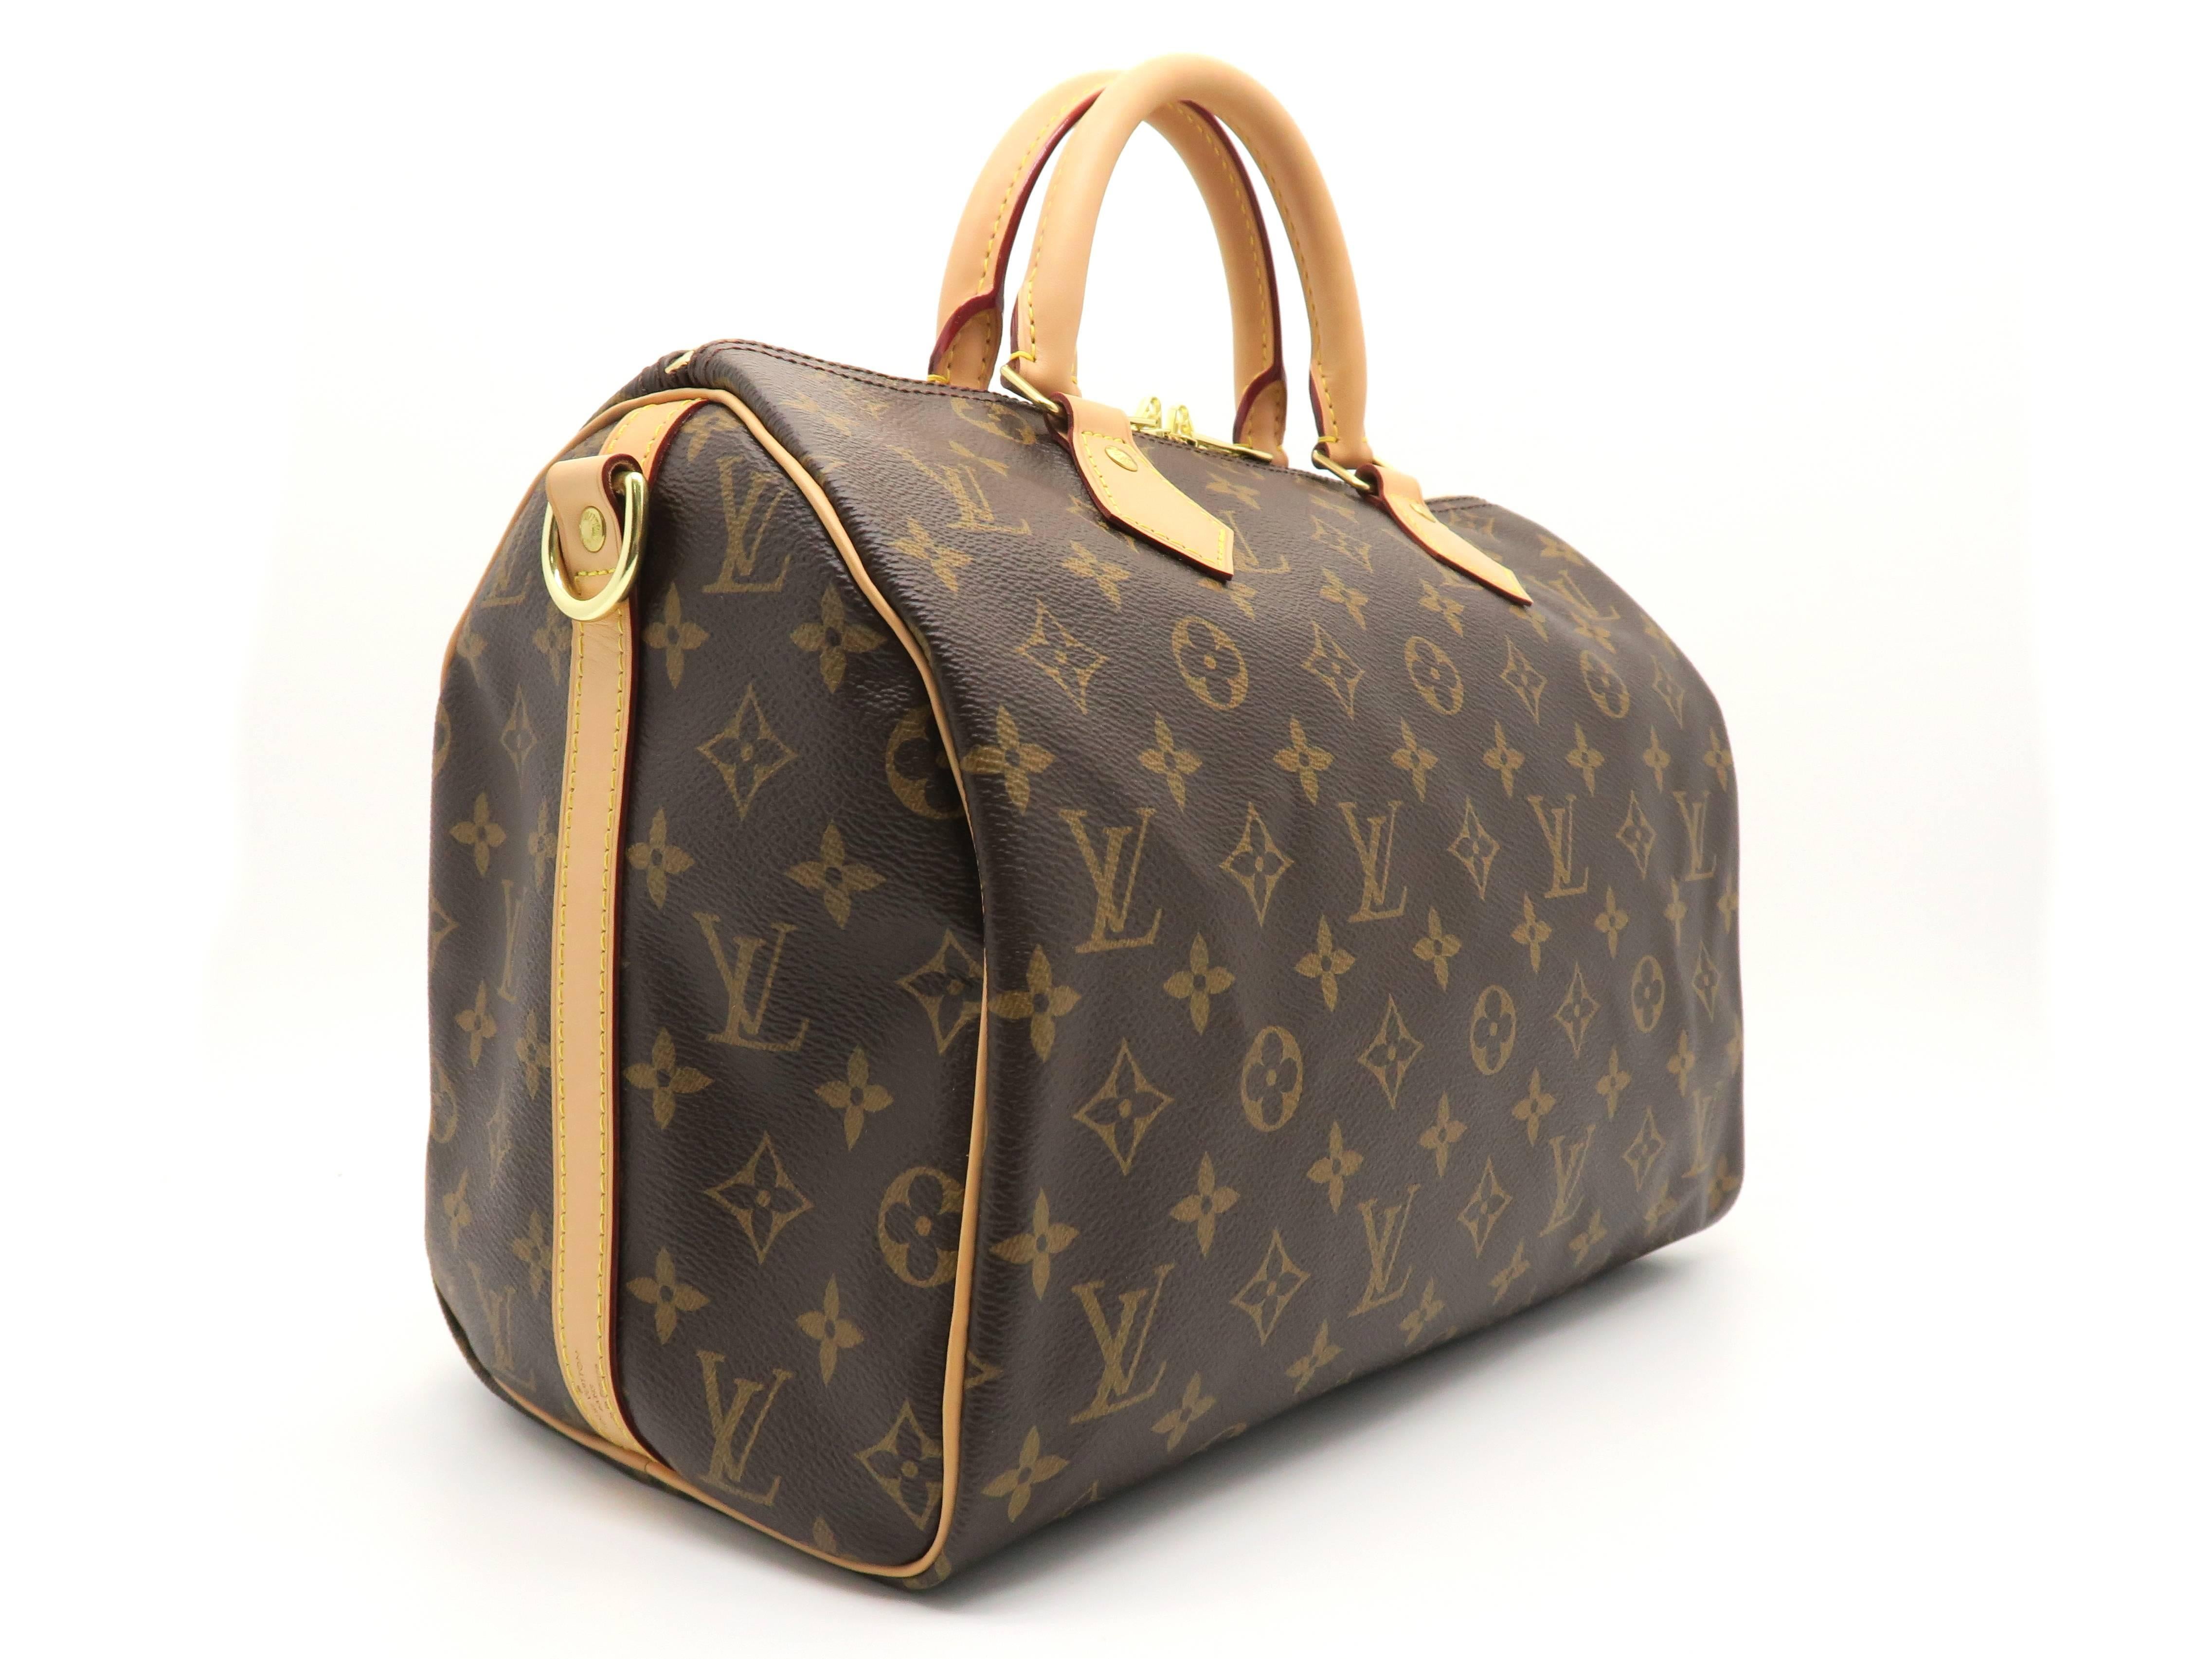 Color: Monogram Brown

Material: Monogram Canvas 

Condition: Rank S 
Overall: Almost New
Surface: Good
Corners: Good
Edges: Good
Handles/Straps: Good
Hardware: Good

Dimension: W32 × H21 × D18cm（W12.5" × H8.2" × D7.0"）
Handle: